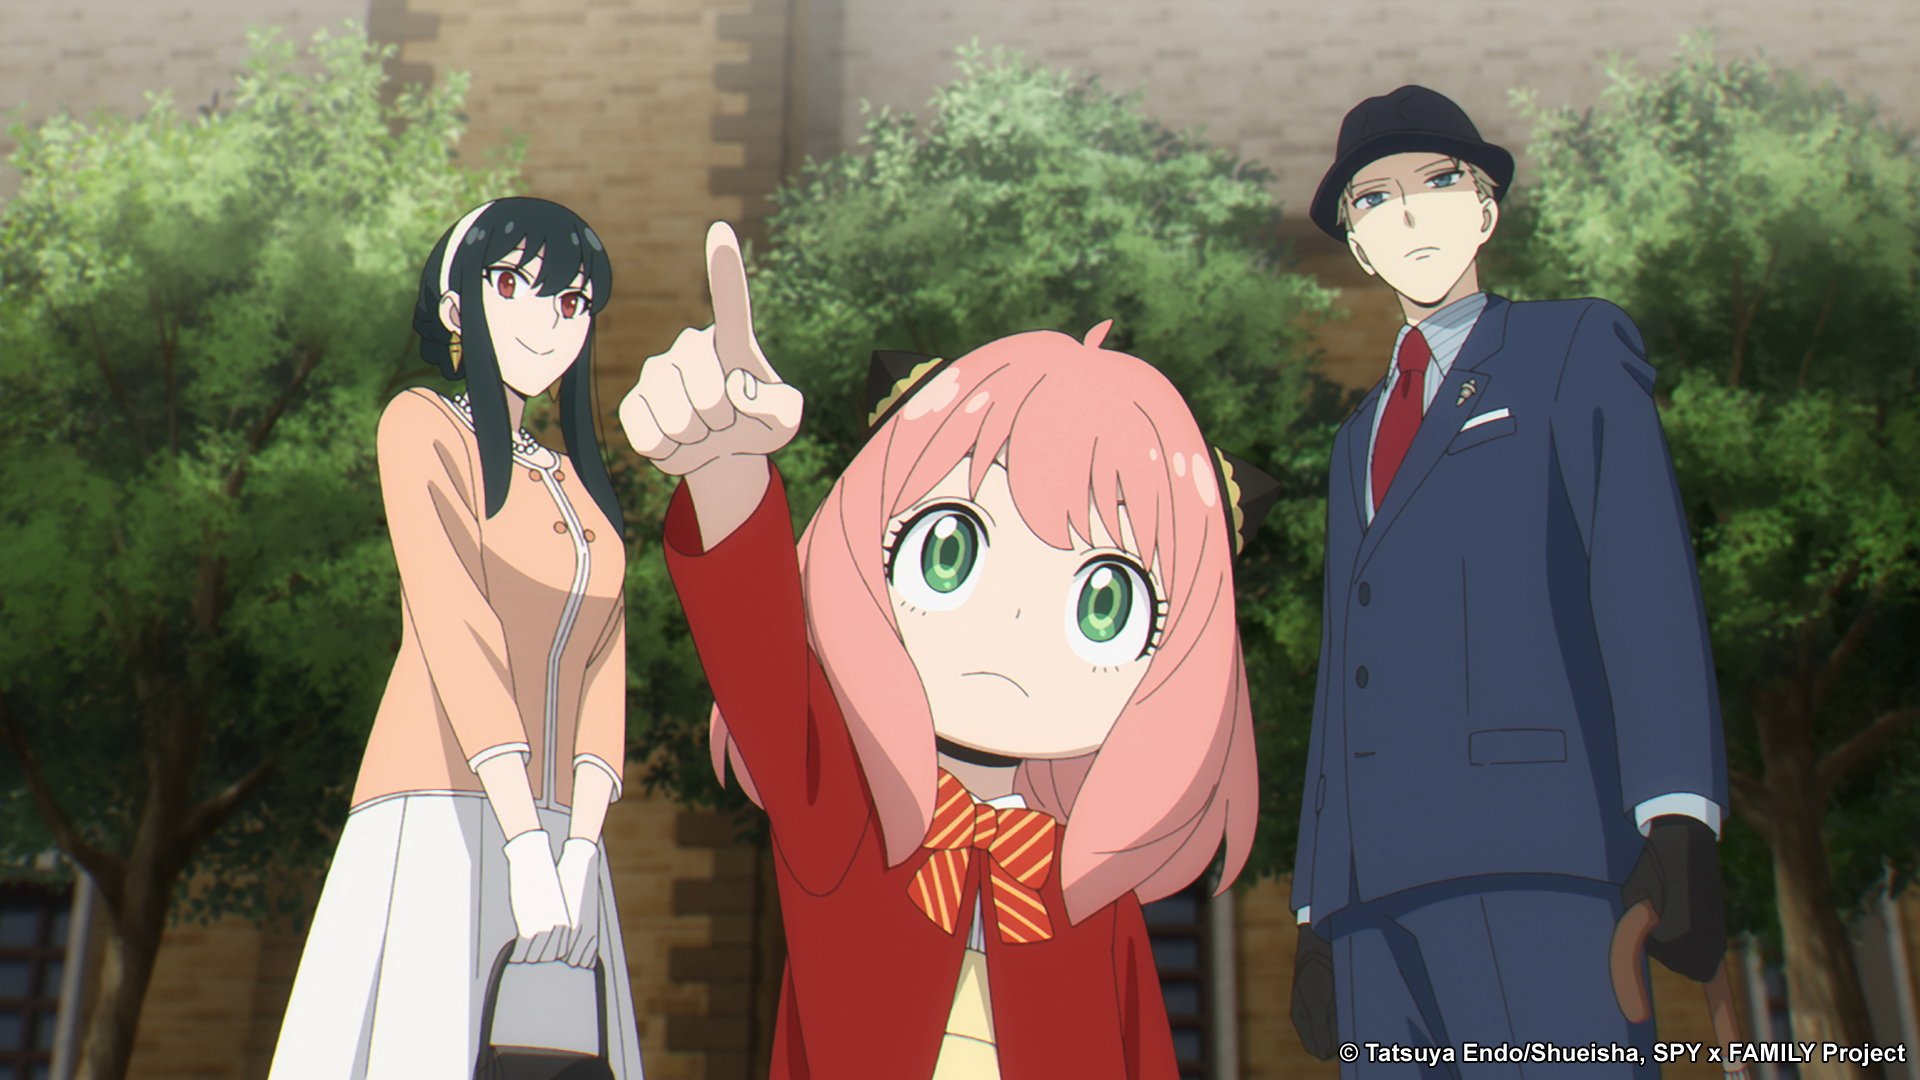 Yor, Anya, and Loid in 'Spy x Family,' which returns for season 1 part 2 in October. Anya is wearing a red uniform, standing in front of her parents, and pointing up at something.